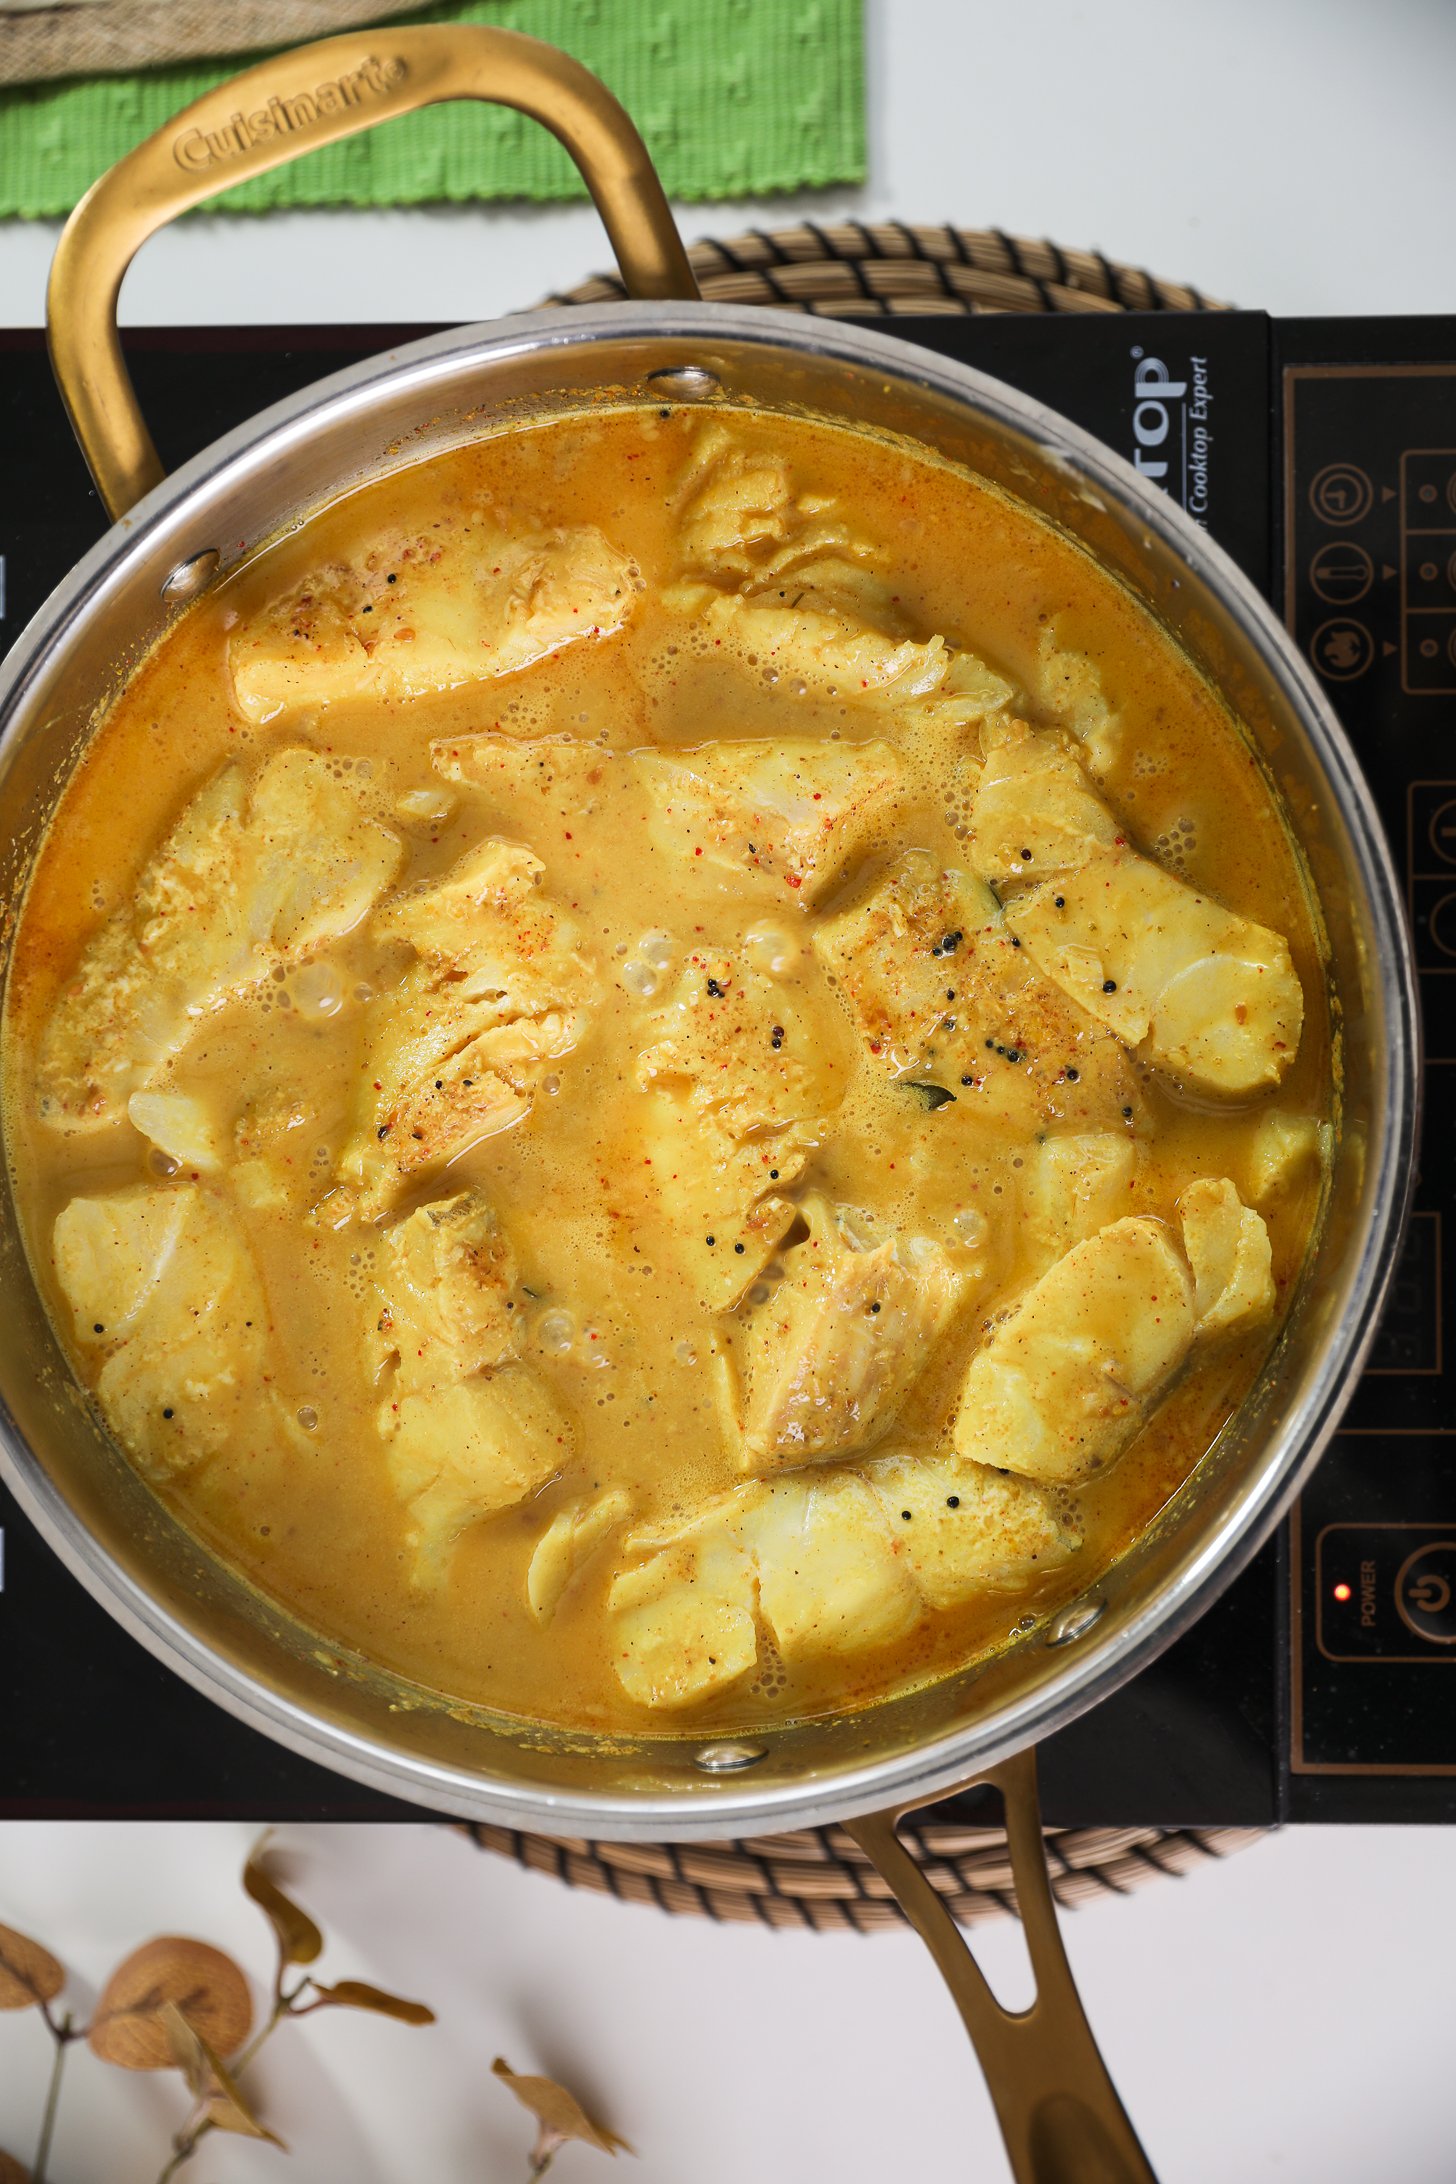 Pan of fish fillets simmering in a curry sauce on a mobile cooktop.